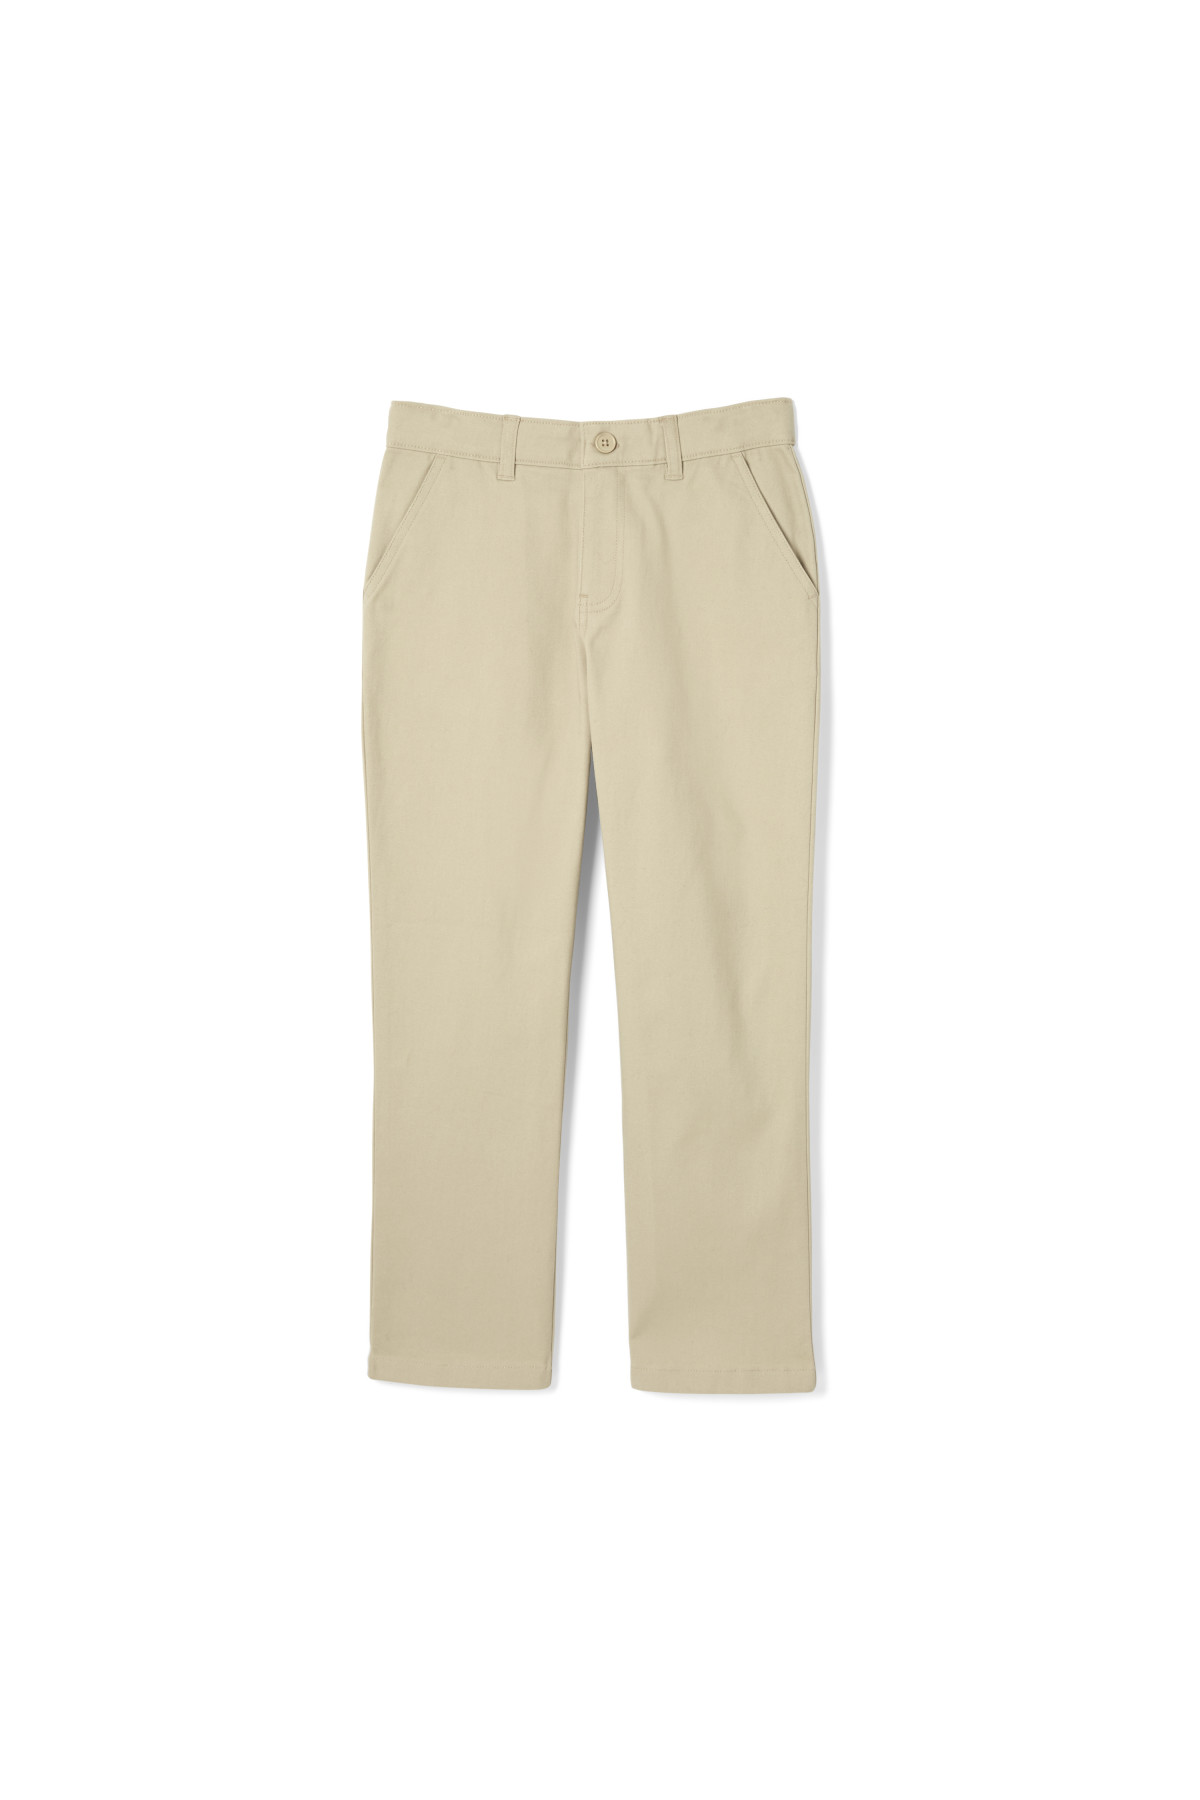 French Toast Boys Track Pant 